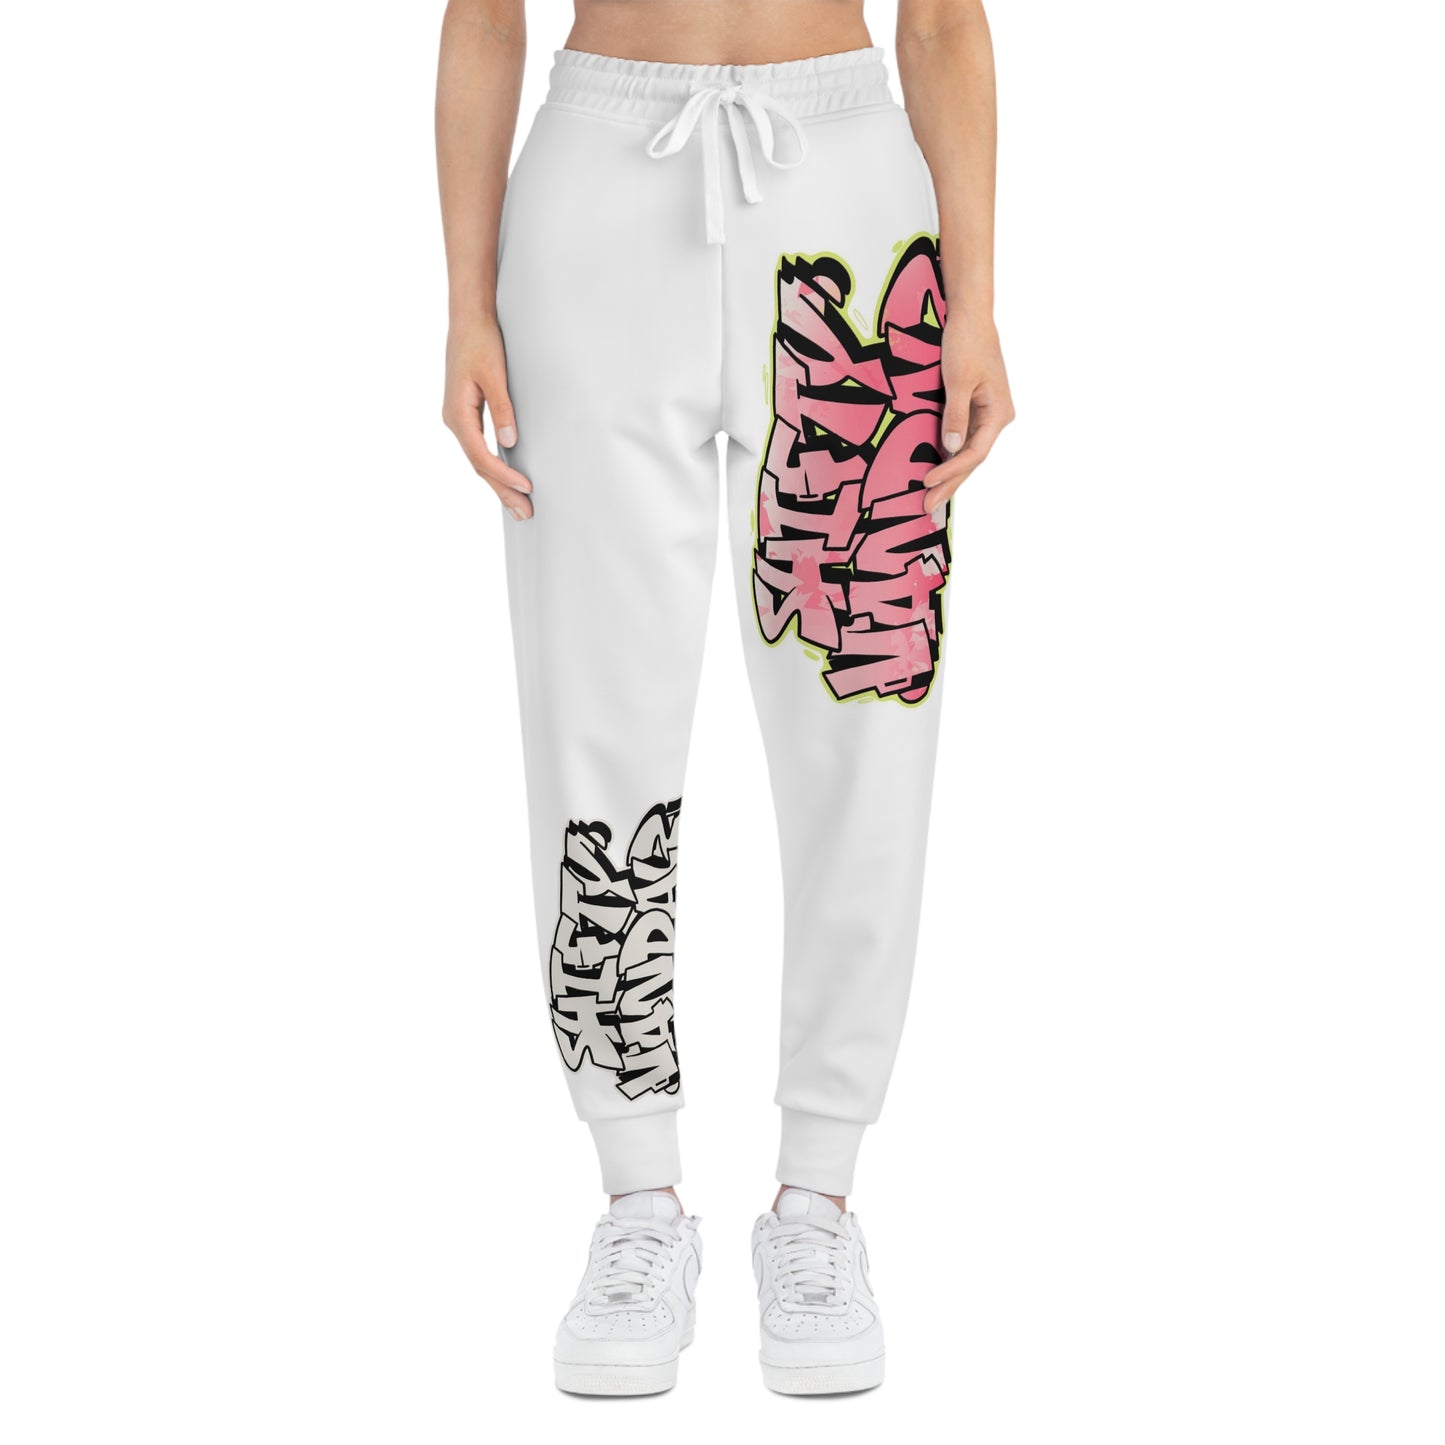 Official shiftyvandalz joggers(Images switched)